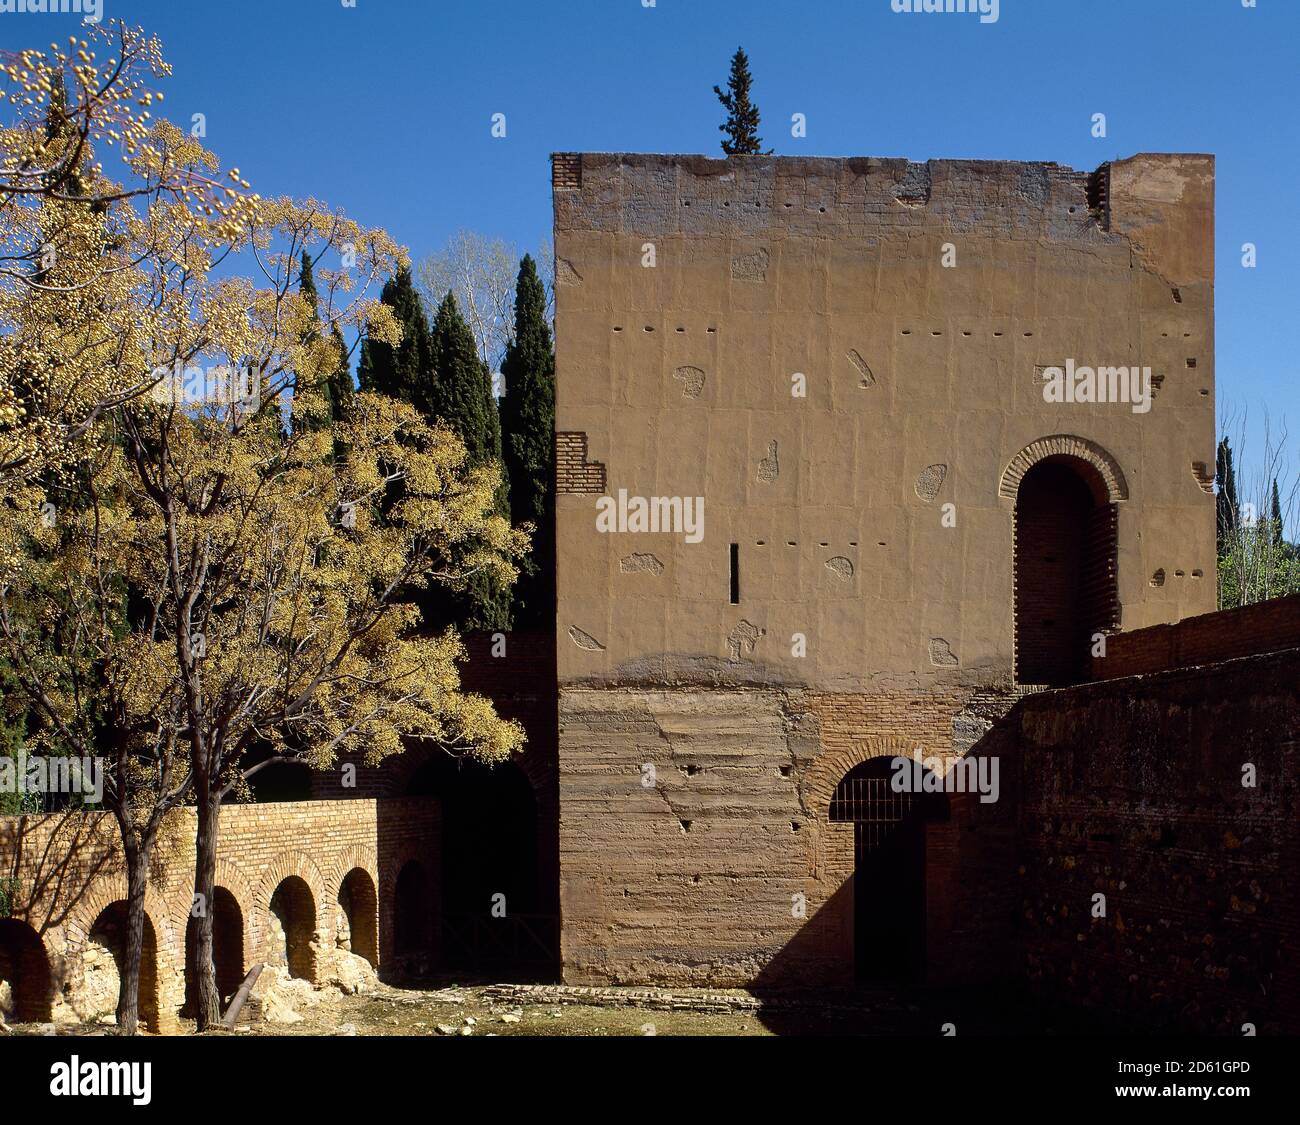 Spain, Andalusia, Granada. The Alhambra. Water Tower (Torre del Agua). Three-floor tower, located next to the aqueduct that takes water from the Generalife to the Alhambra. Stock Photo